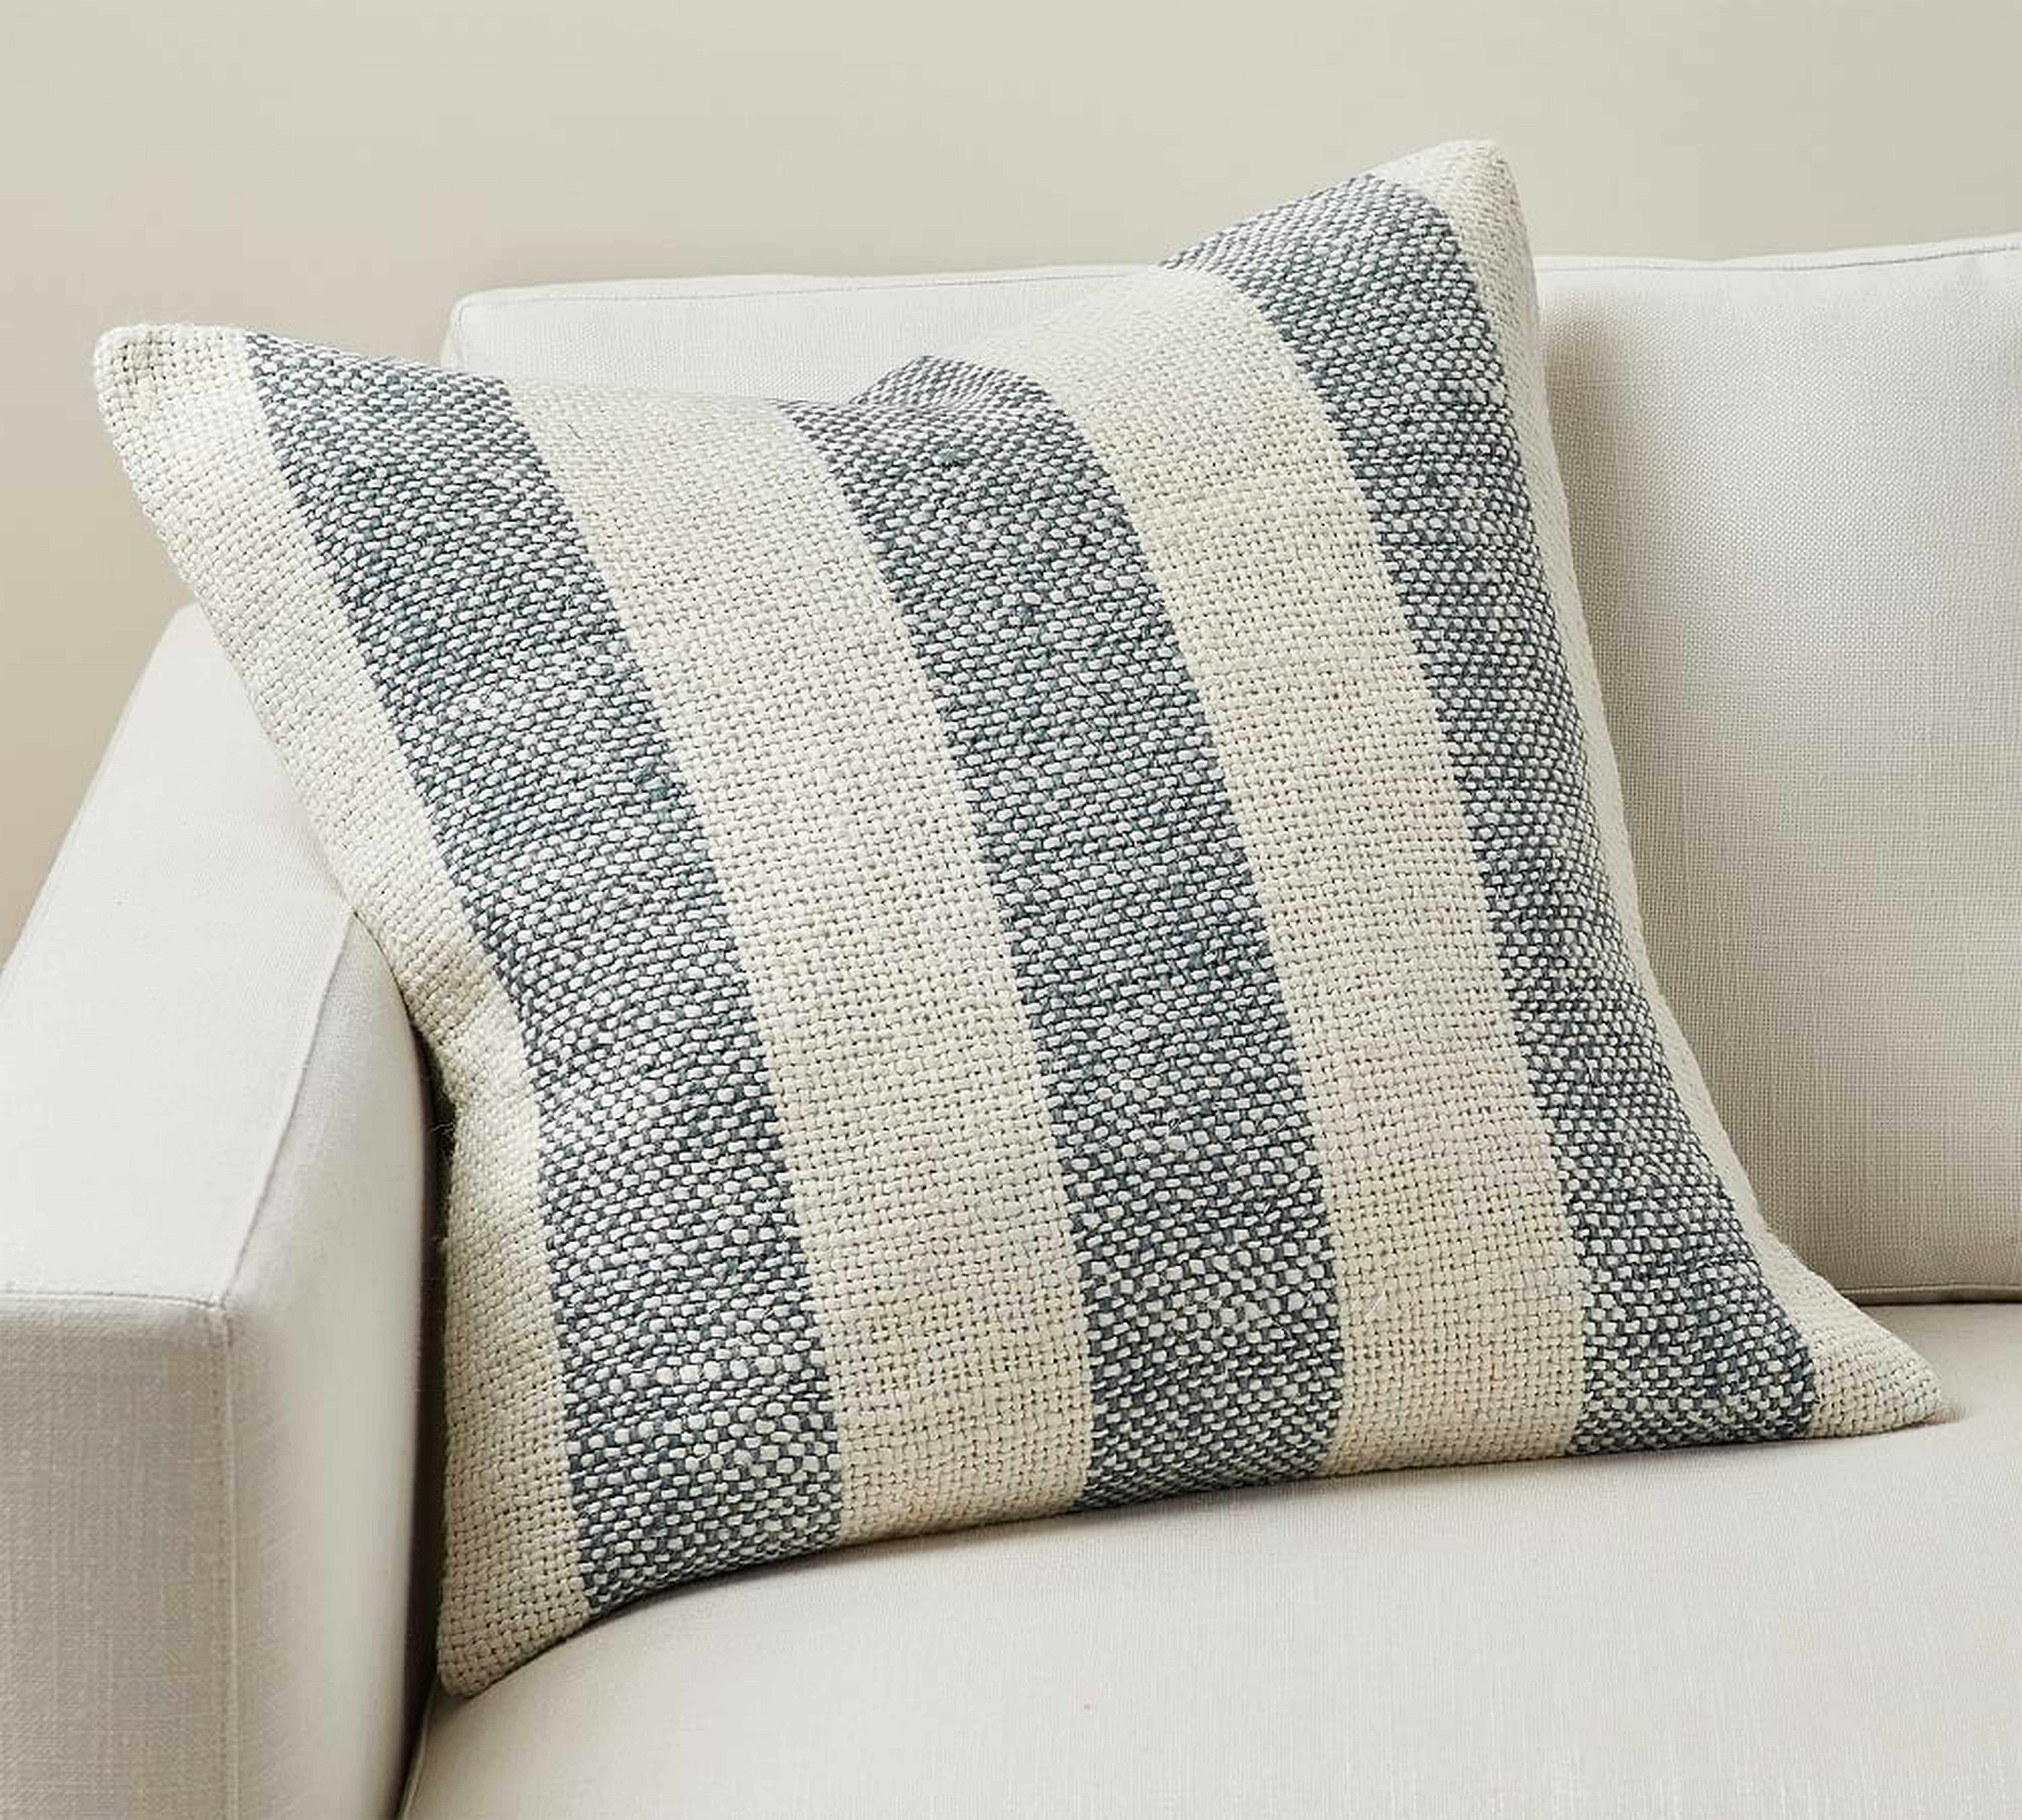 Faye Textured Striped Pillow Cover, 22", Chambray - Pottery Barn